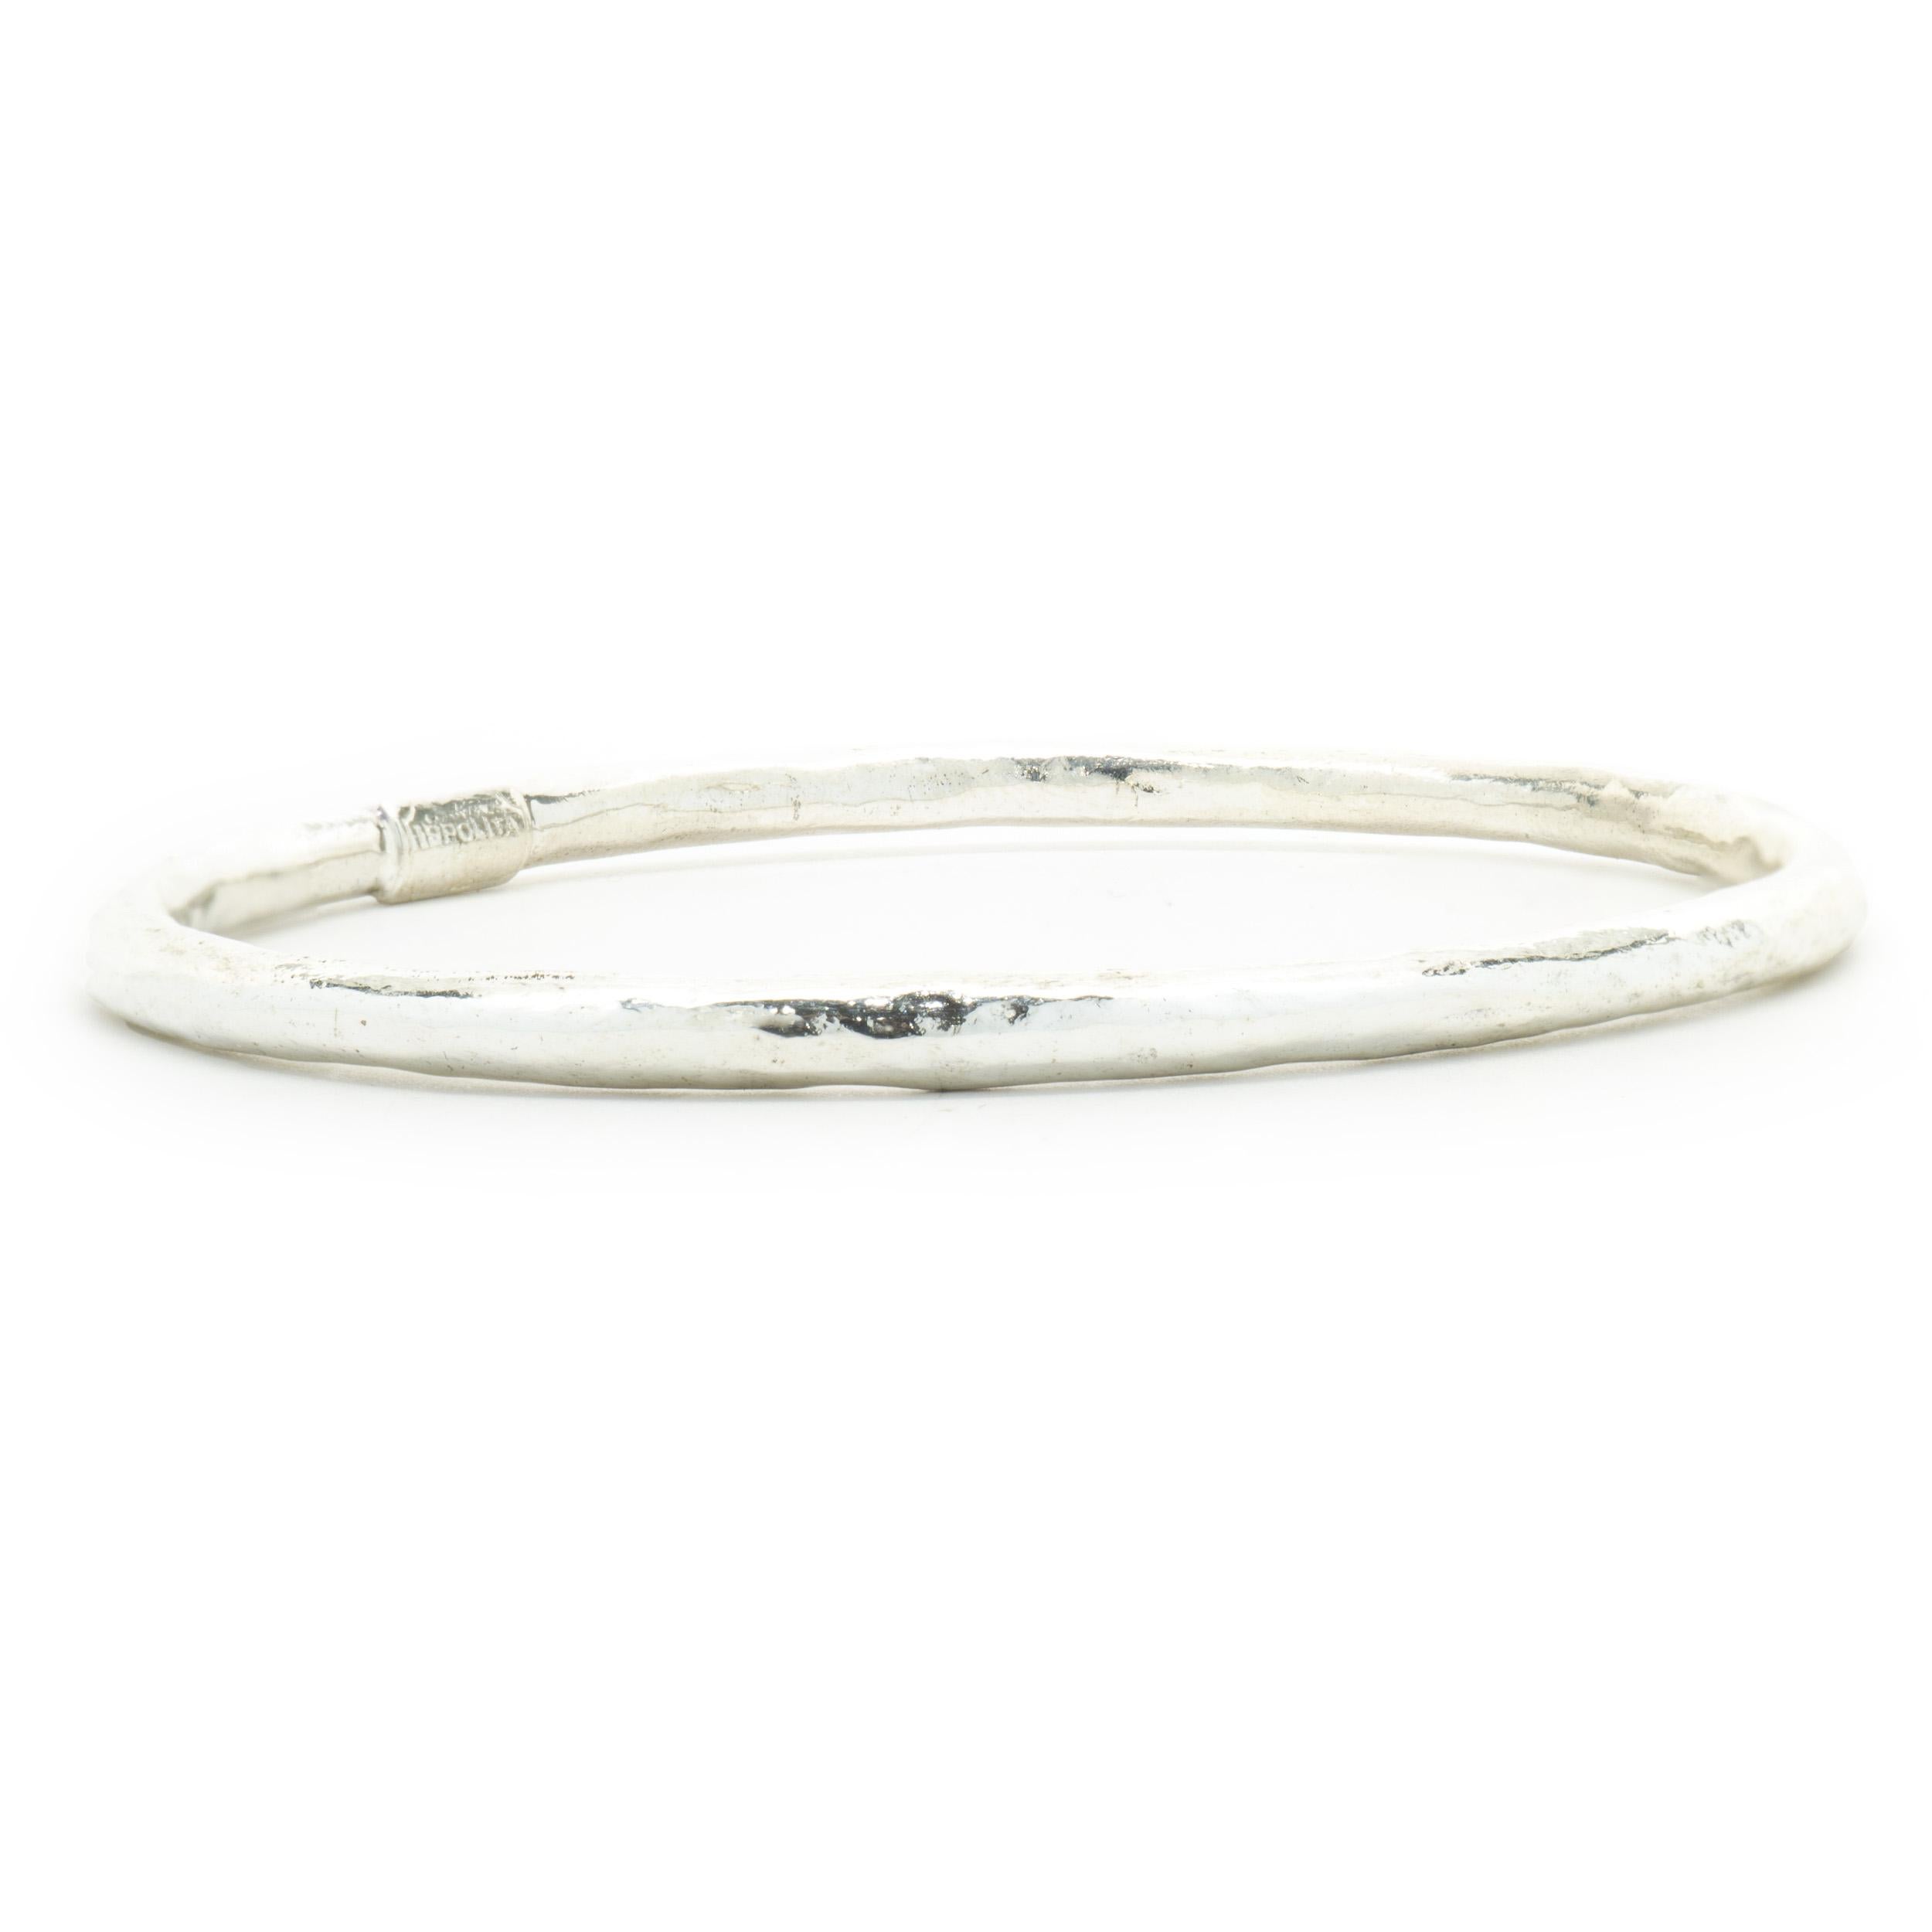 Designer: Ippolita
Material: sterling silver
Dimensions: bracelet will fit up to a 7.5-inch wrist
Weight: 22.29 grams
